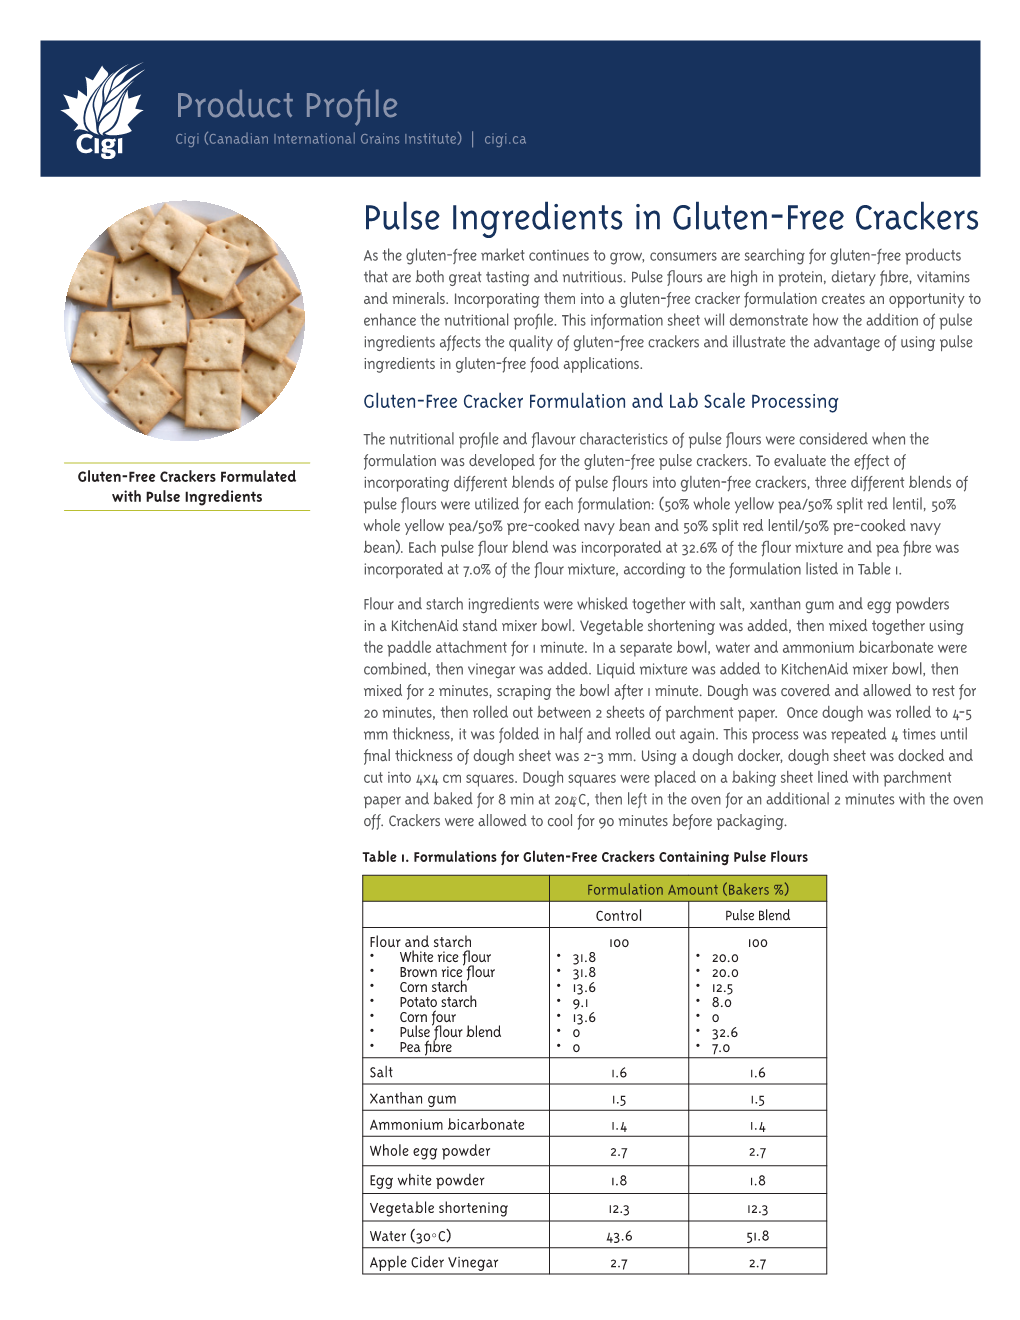 Product Profile Pulse Ingredients in Gluten-Free Crackers